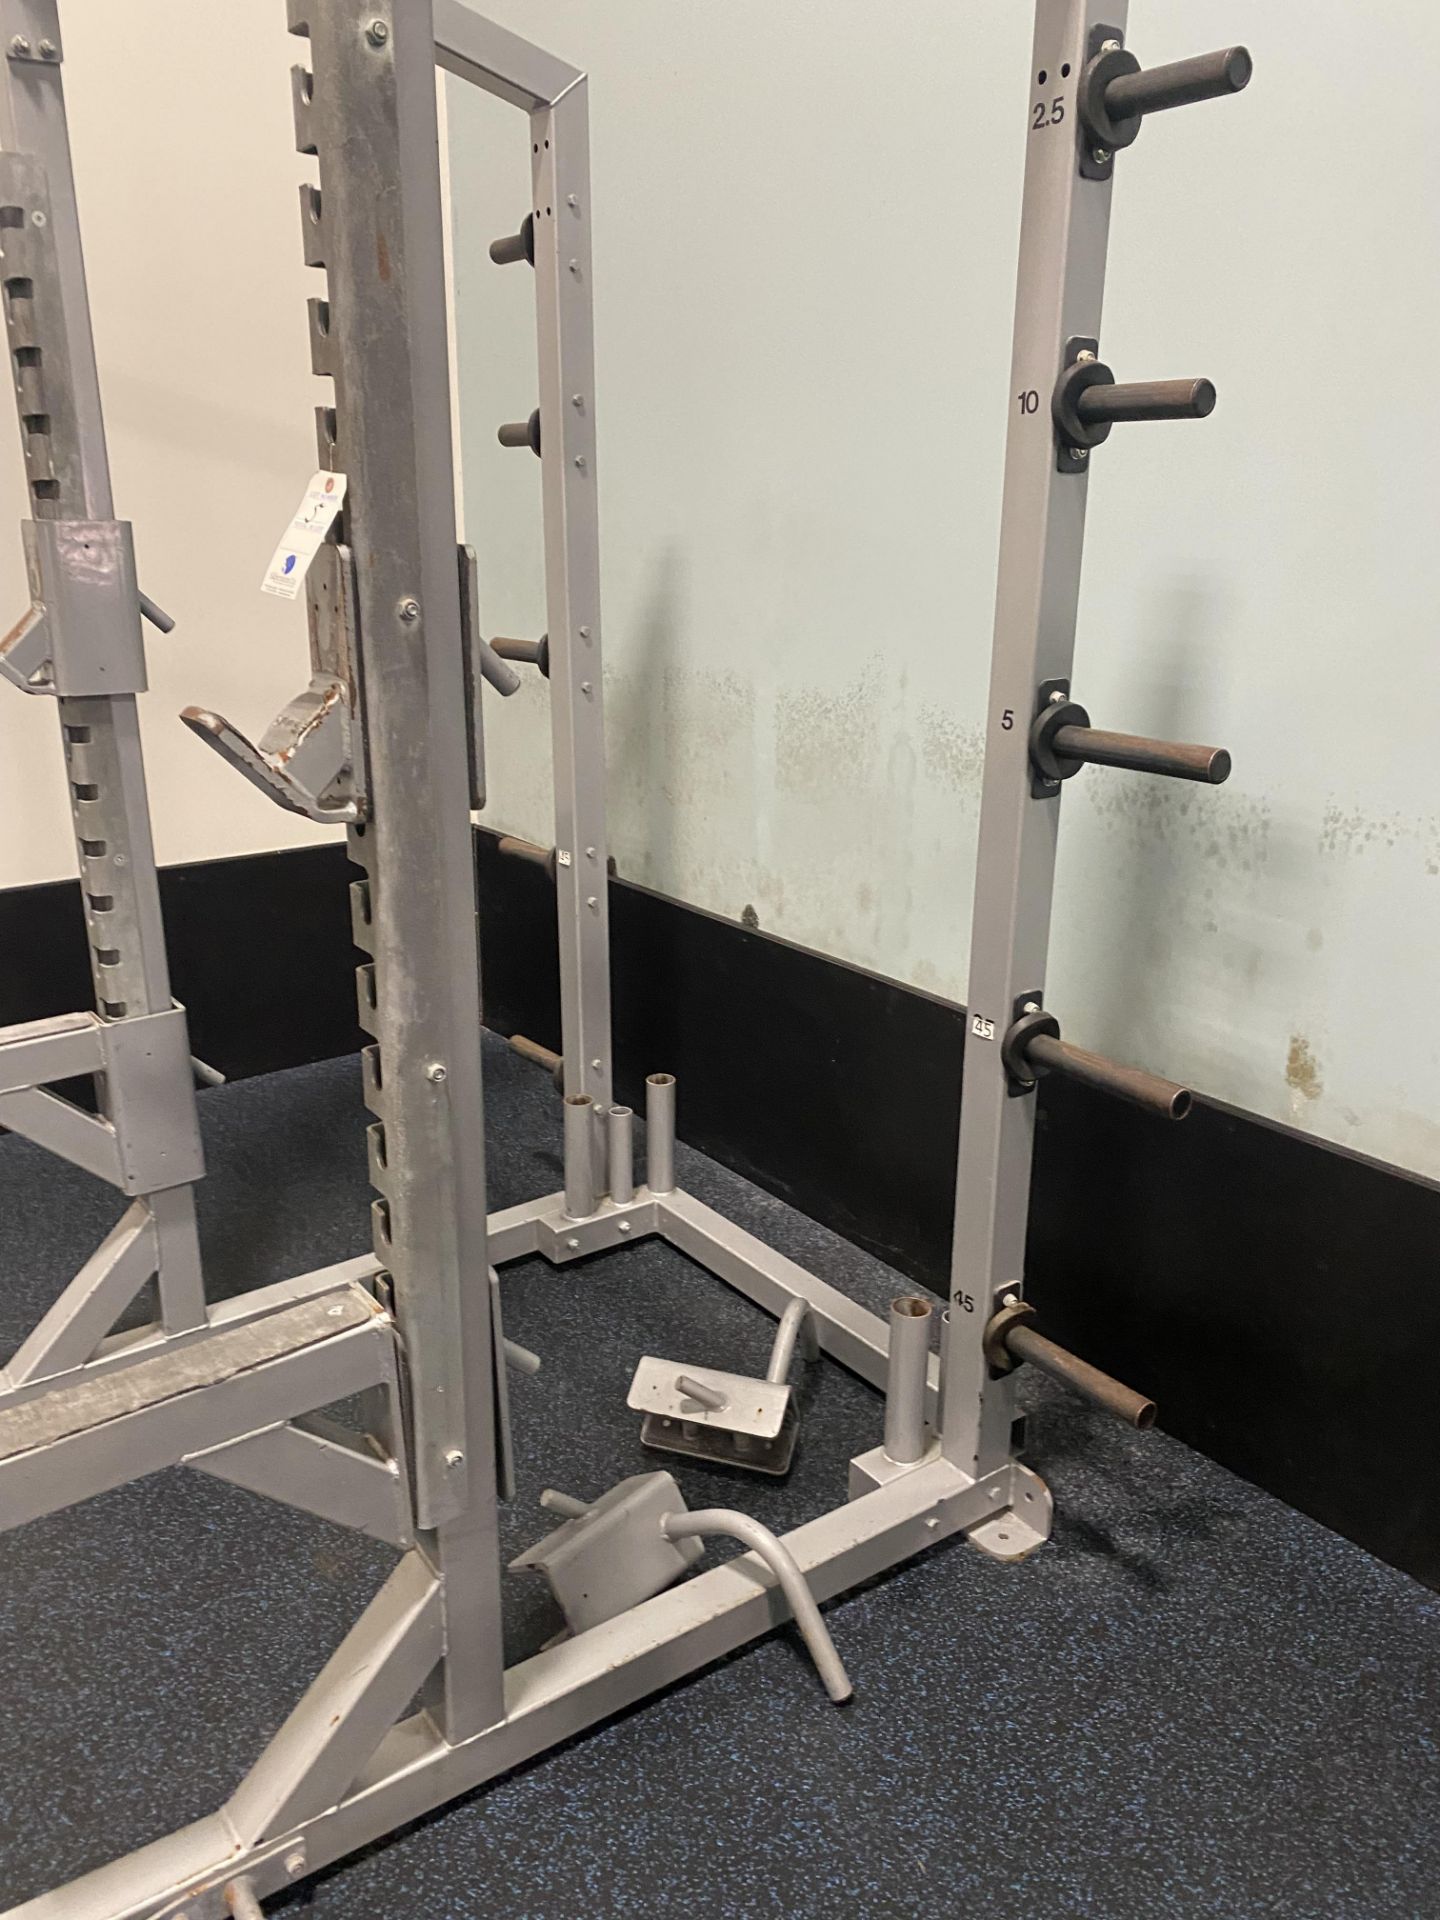 Squat Rack w/ Safety Bars, Weight Holder, and Pull up Bar (No Weights) - Image 6 of 6